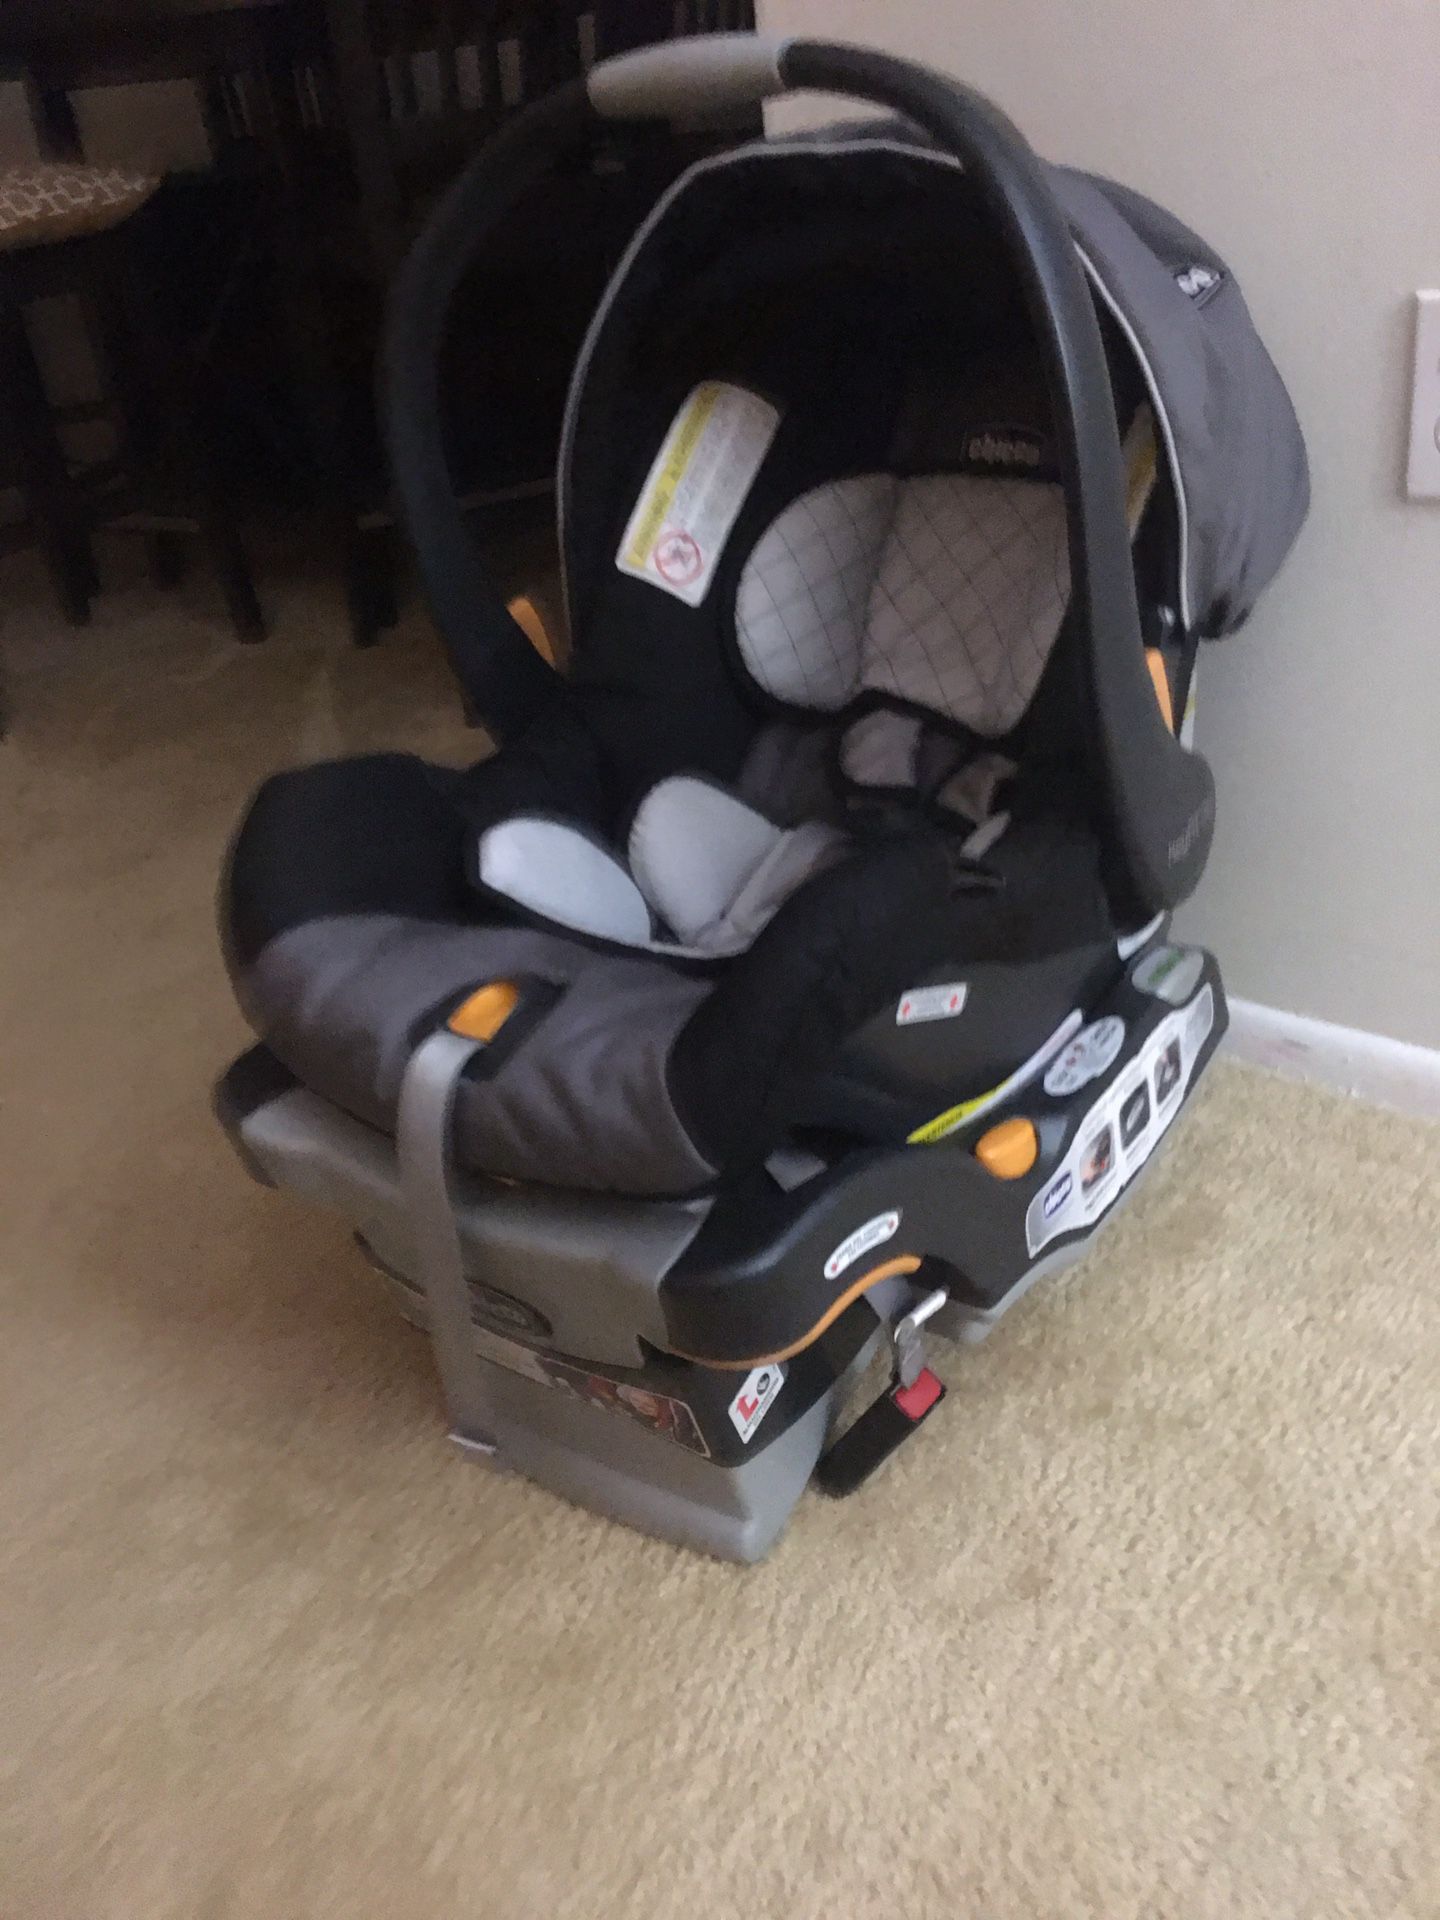 CHICCO car seat 💺 and base $70